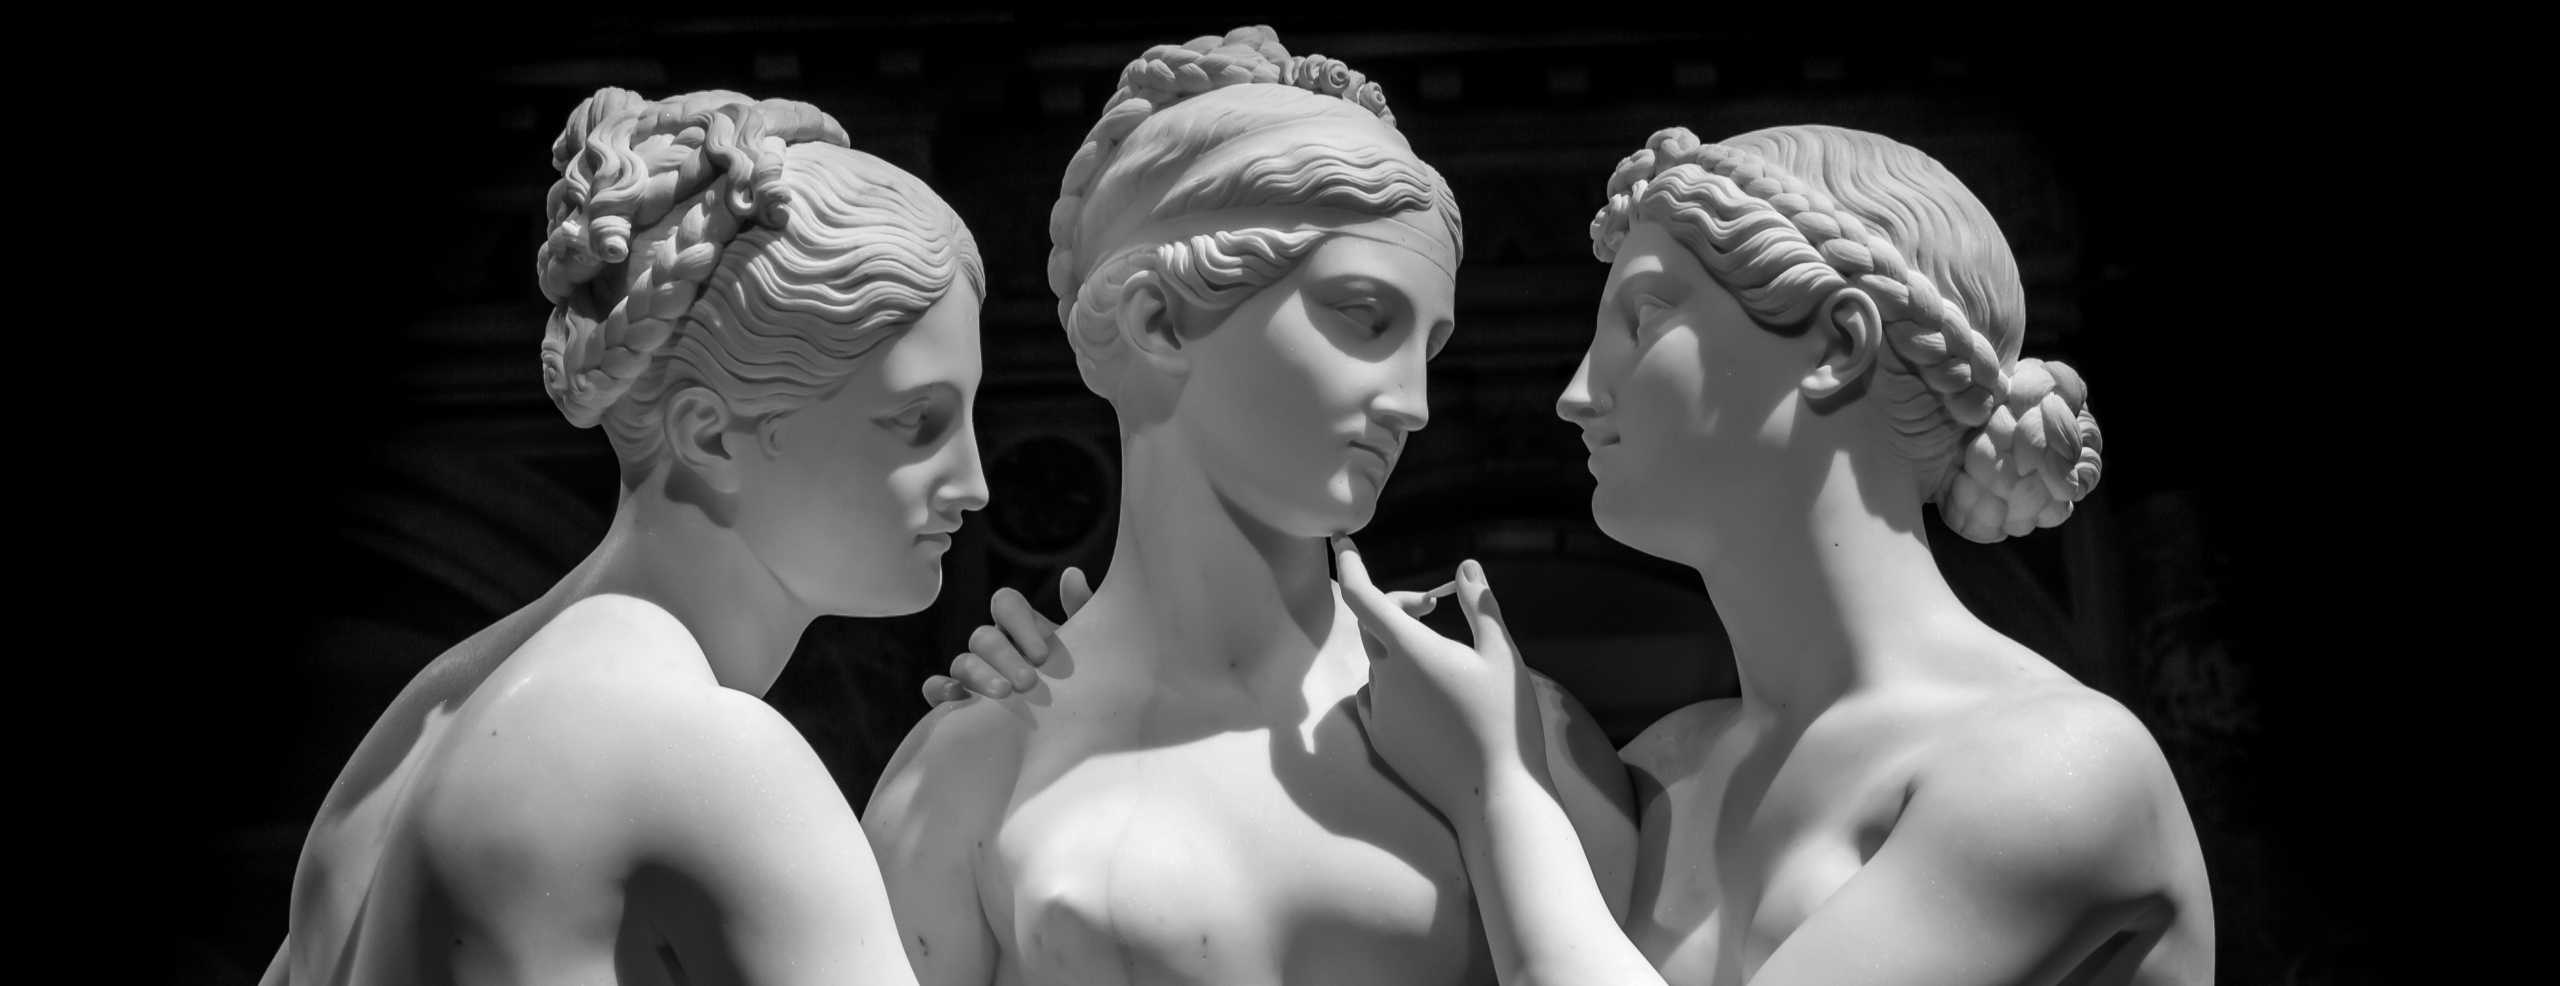 Milan, Italy - June 2020: Bertel Thorvaldsen’s statue The Three Graces. Neoclassical sculpture, in marble, of the mythological three charites.